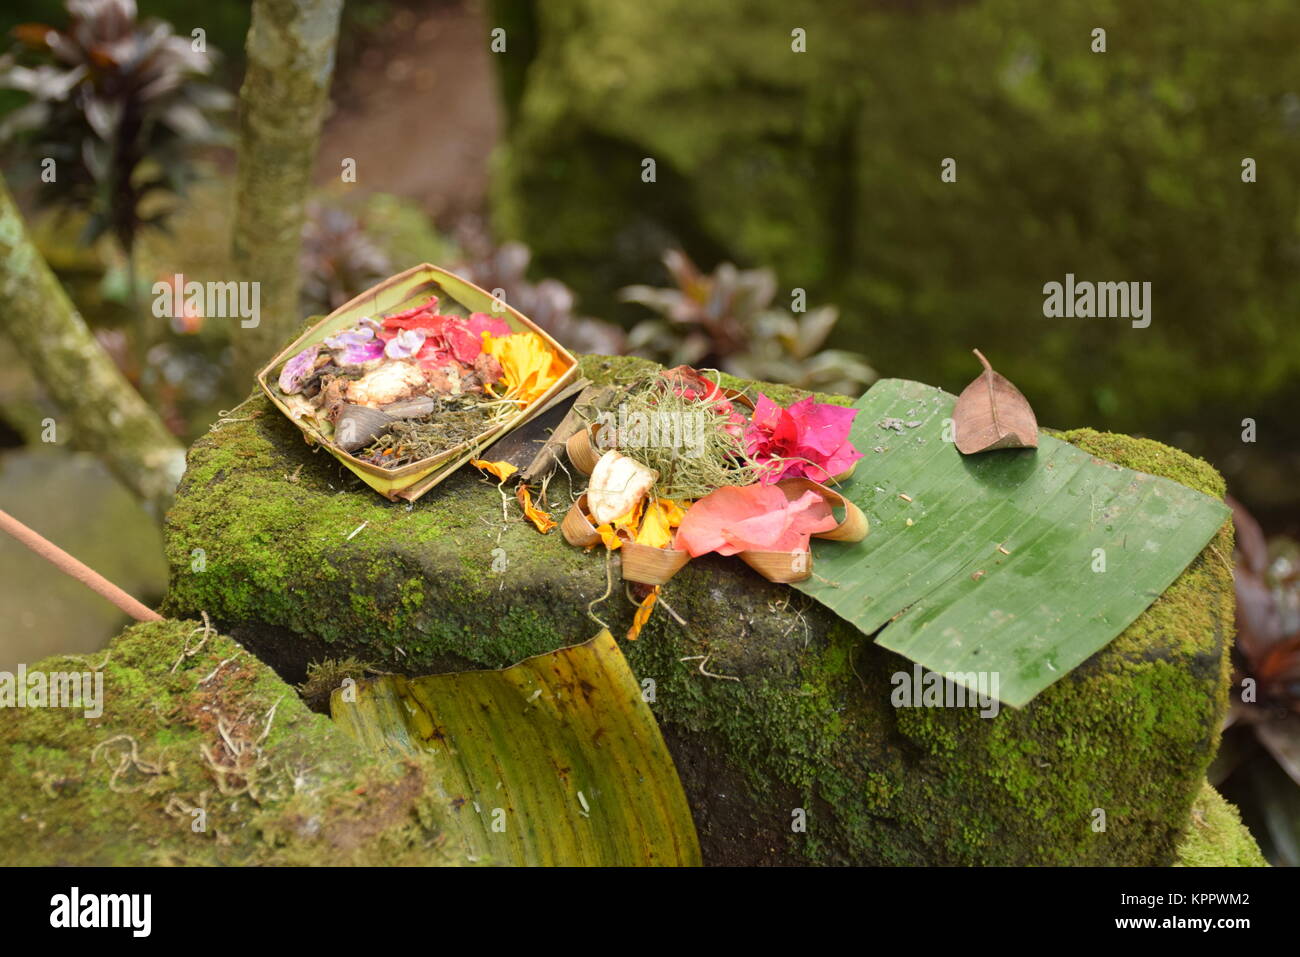 Typical balinese offerings also called Canang Sari inside Goa Gajah hindu temple in Bali - Indonesia Stock Photo